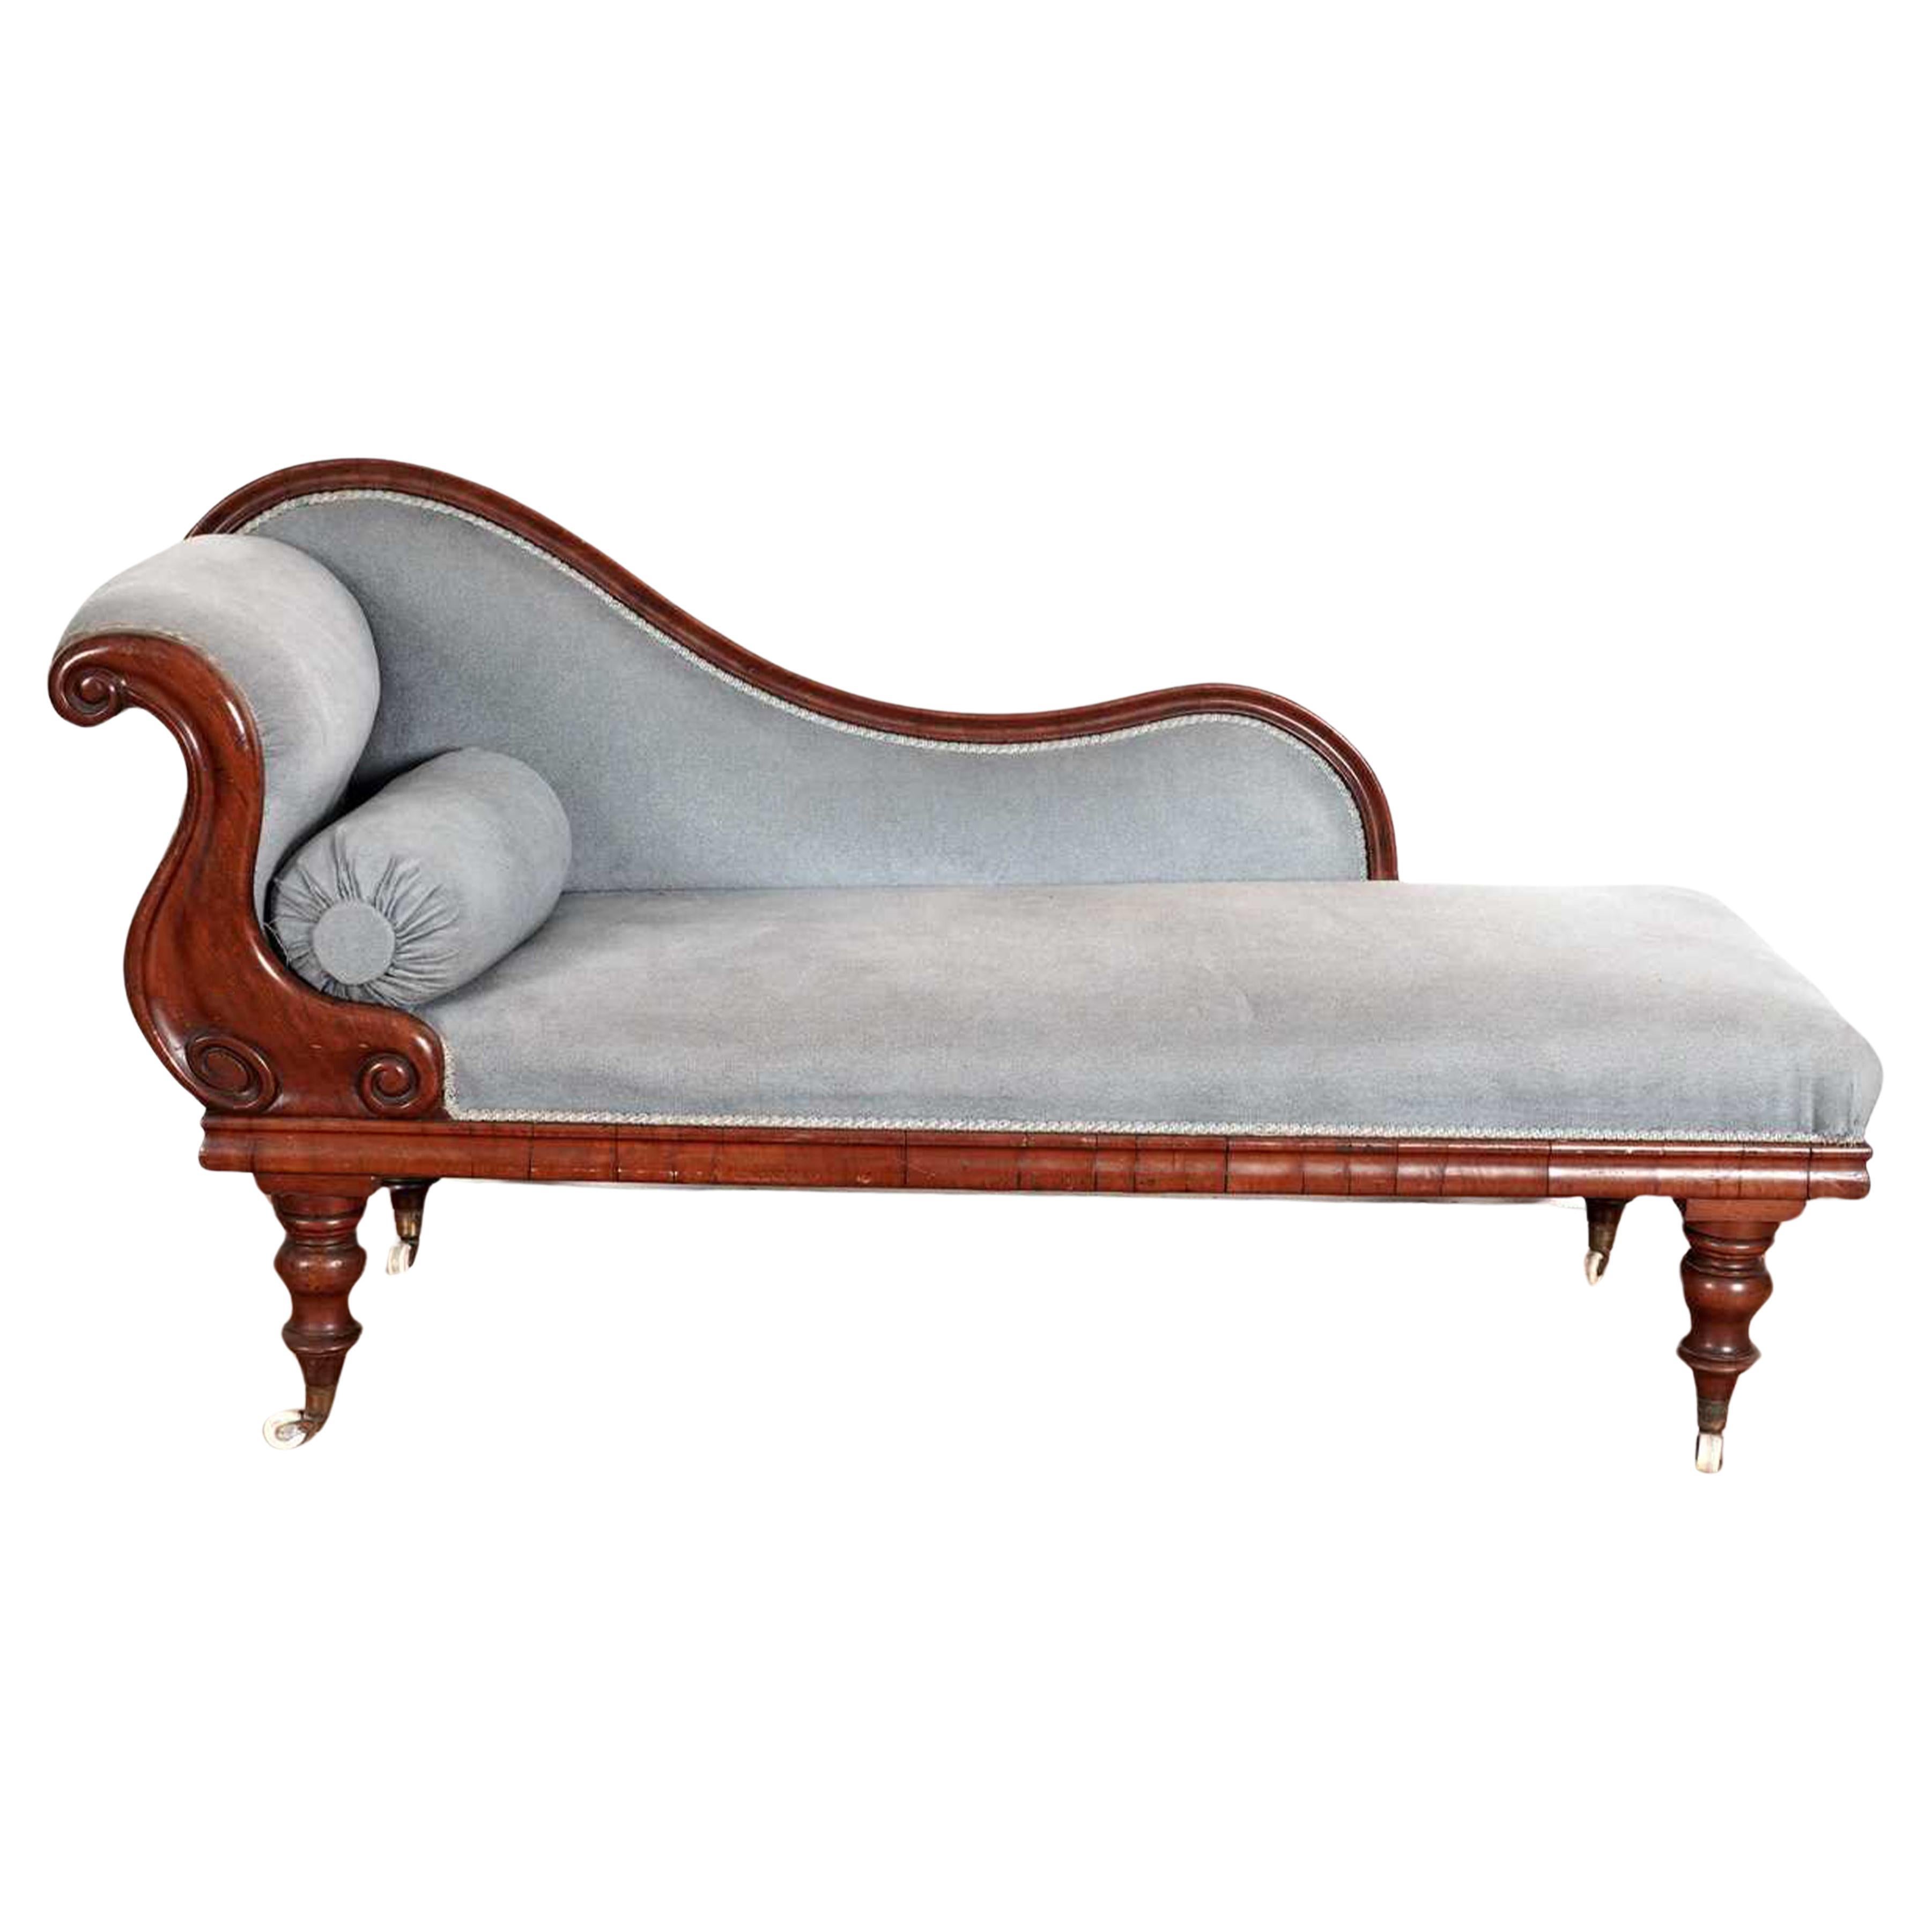 British A Victorian Mahogany Swan Back Chaise Longue Upholstered in a Blue Velvet Fabric For Sale